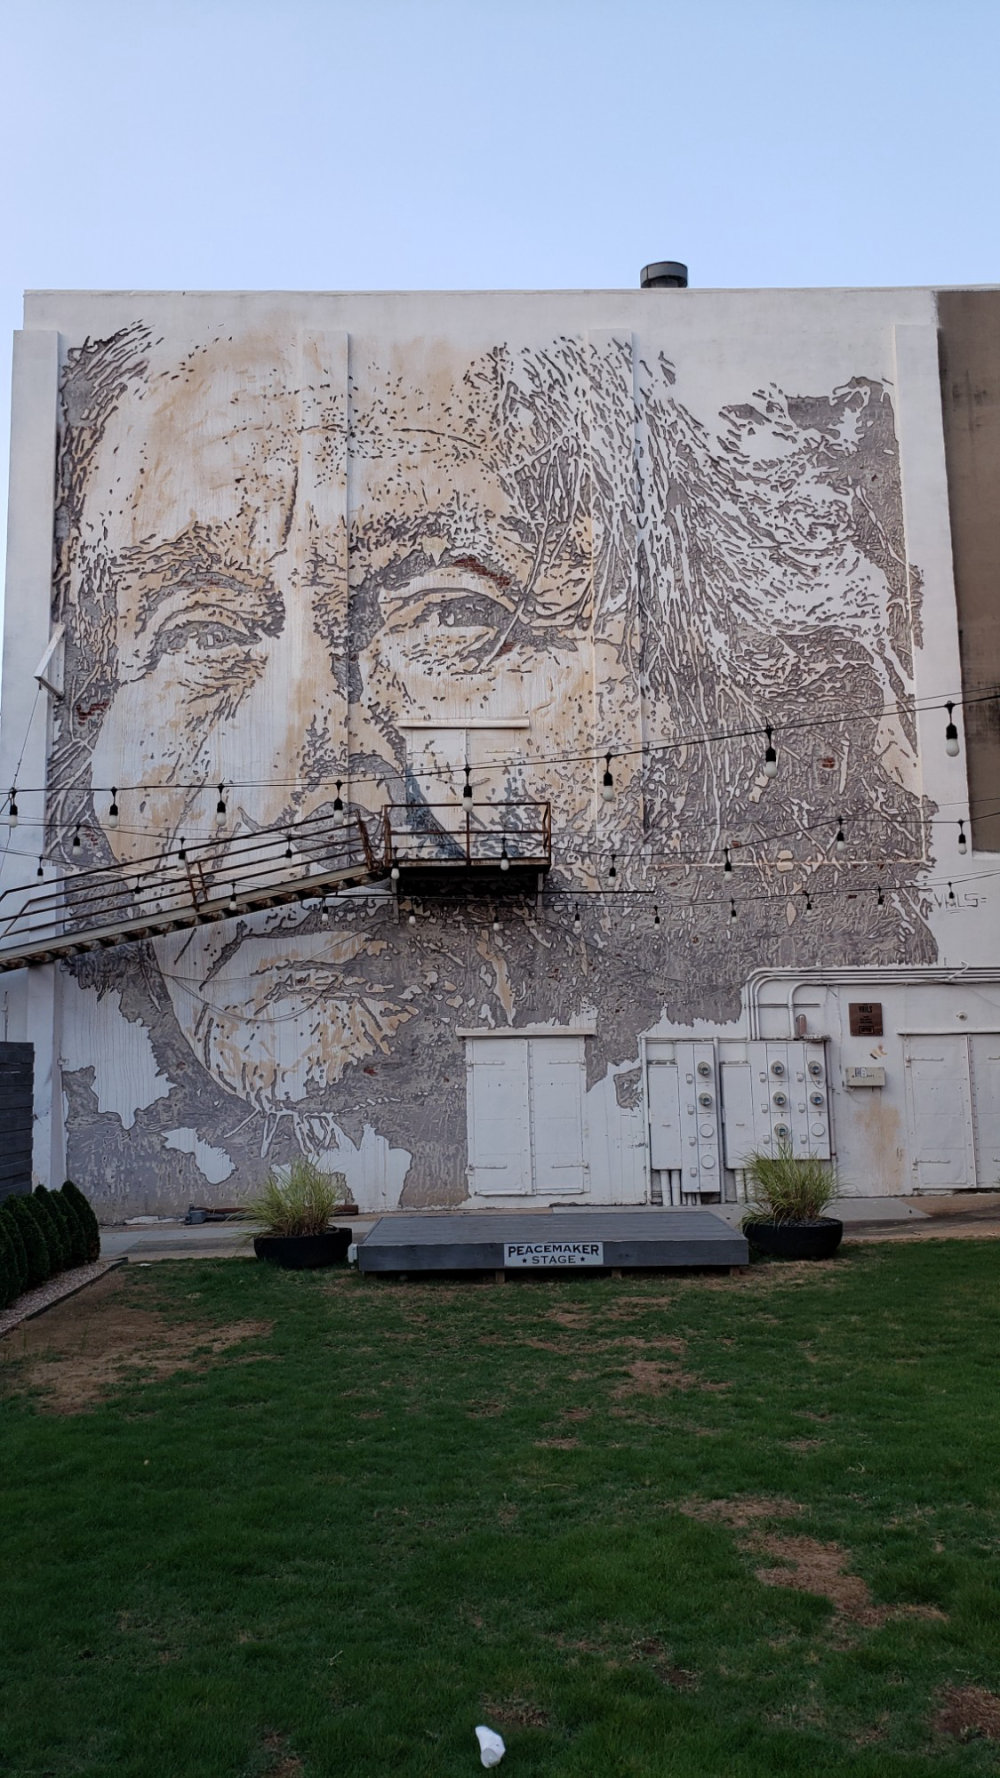 mural in Fort Smith by artist Vhils.